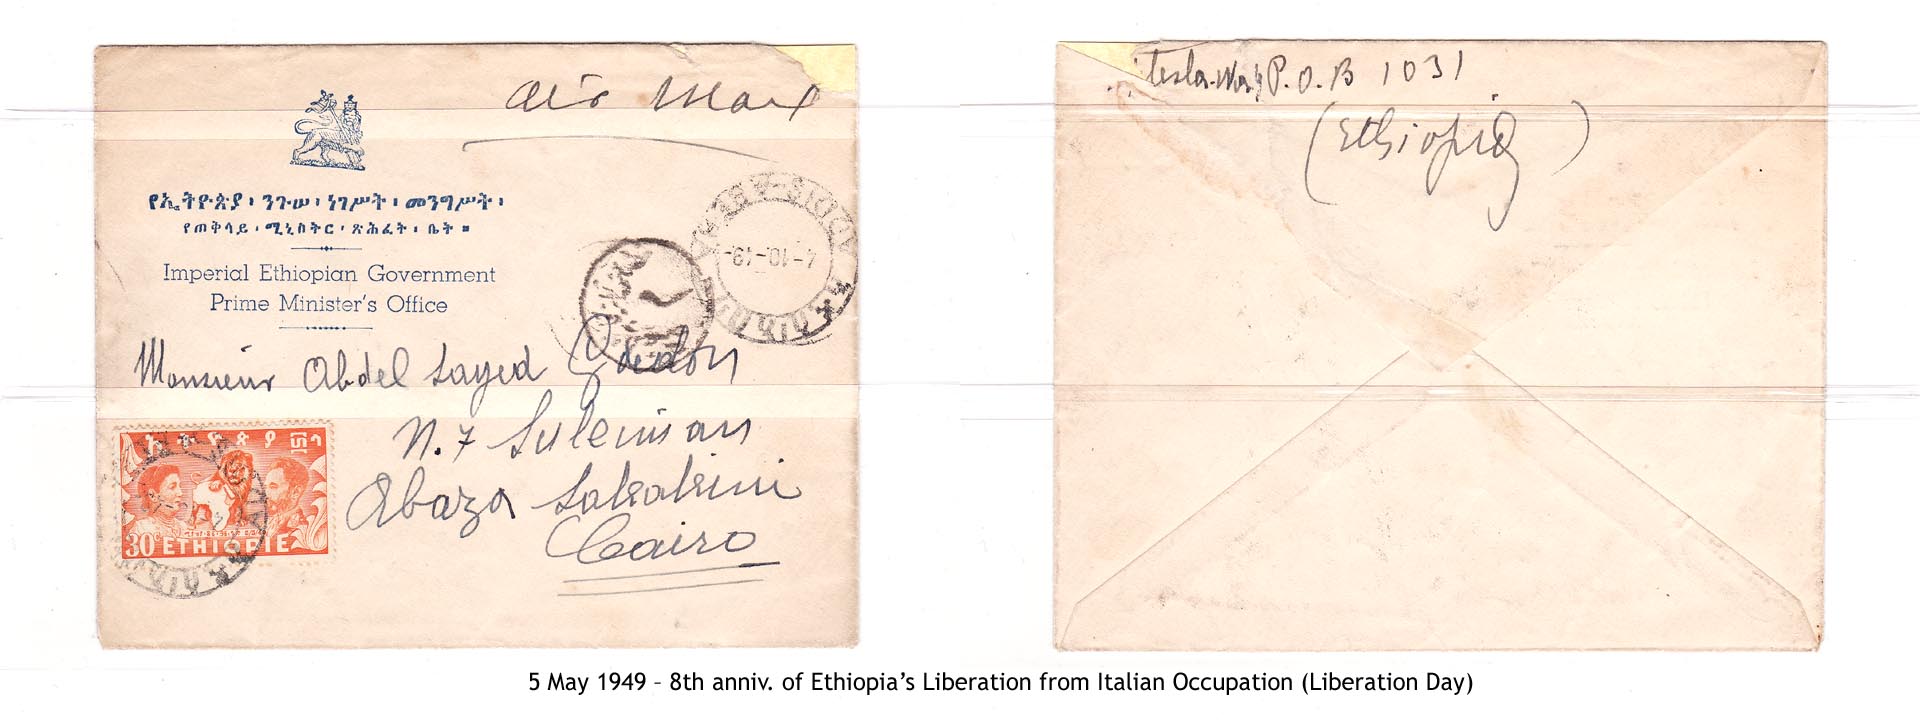 19490505 – 8th anniv. of Ethiopia’s Liberation from Italian Occupation (Liberation Day)